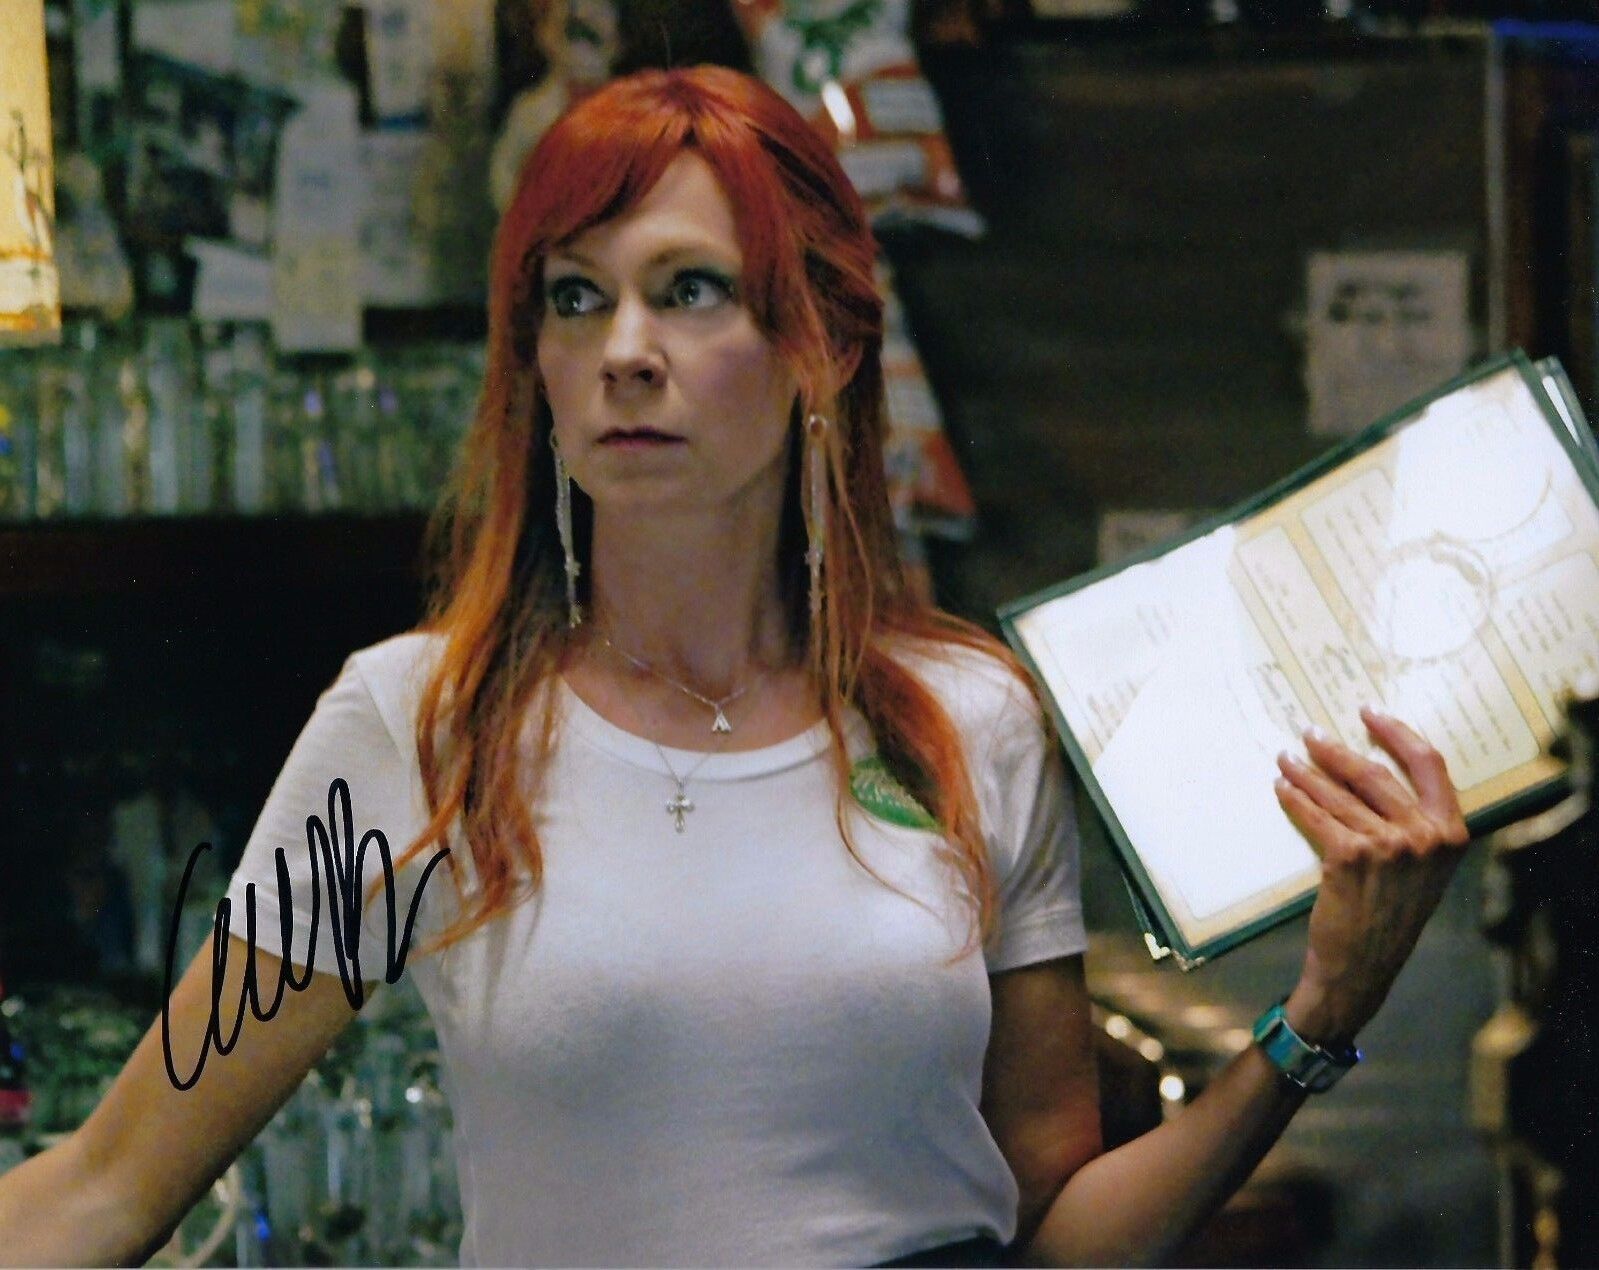 GFA True Blood * CARRIE PRESTON * Signed Autographed 8x10 Photo Poster painting MH1 COA